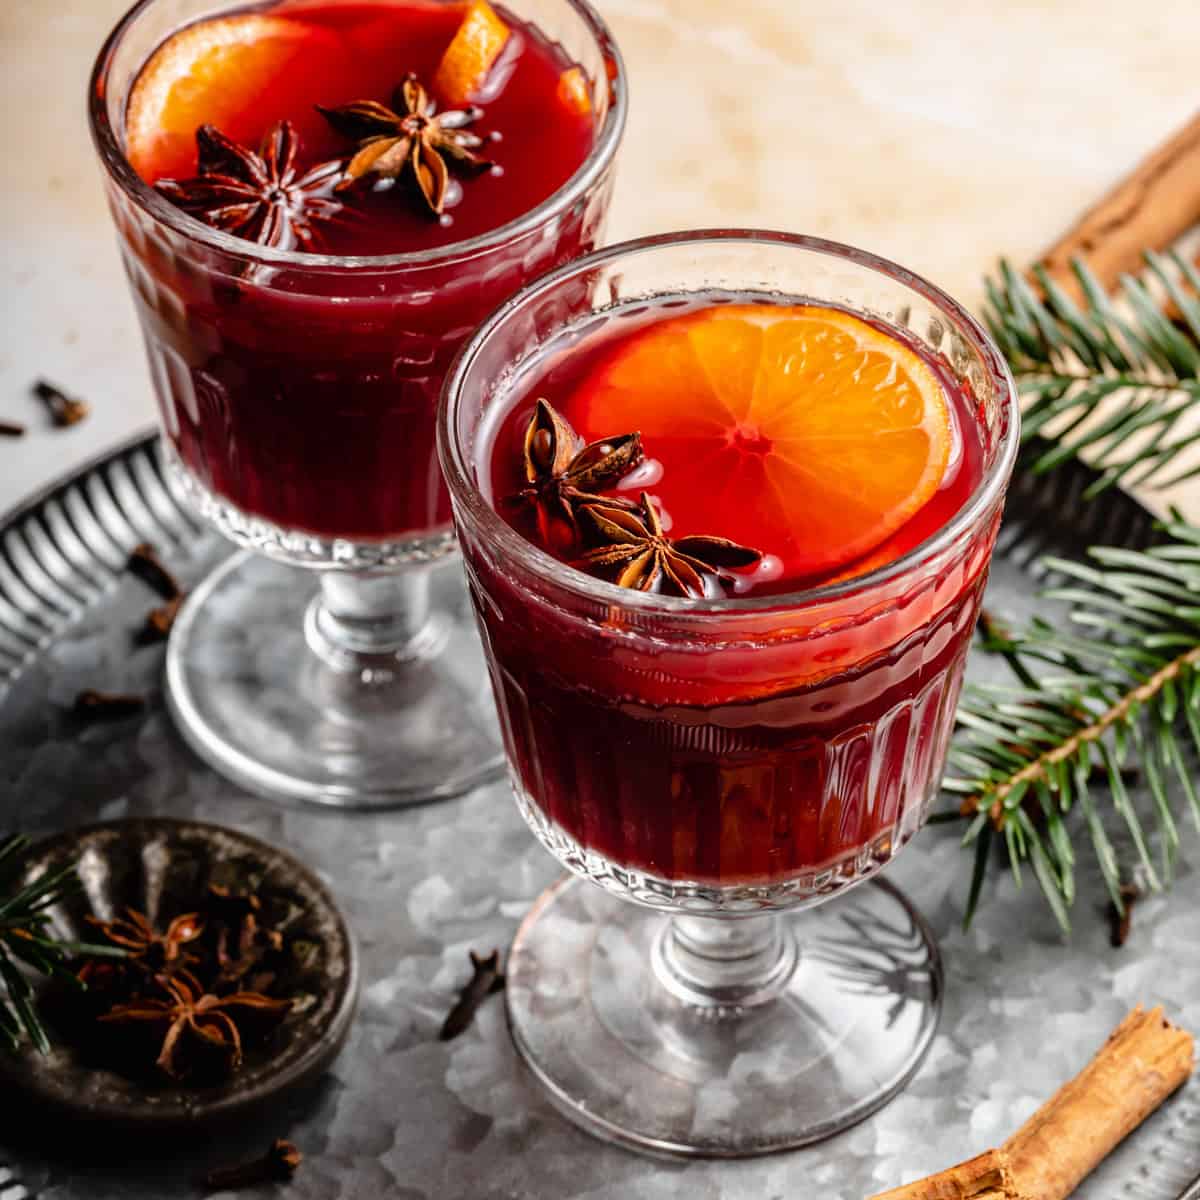 https://www.eatloveeats.com/wp-content/uploads/2021/12/Non-Alcoholic-Mulled-Wine-Featured-Image.jpg